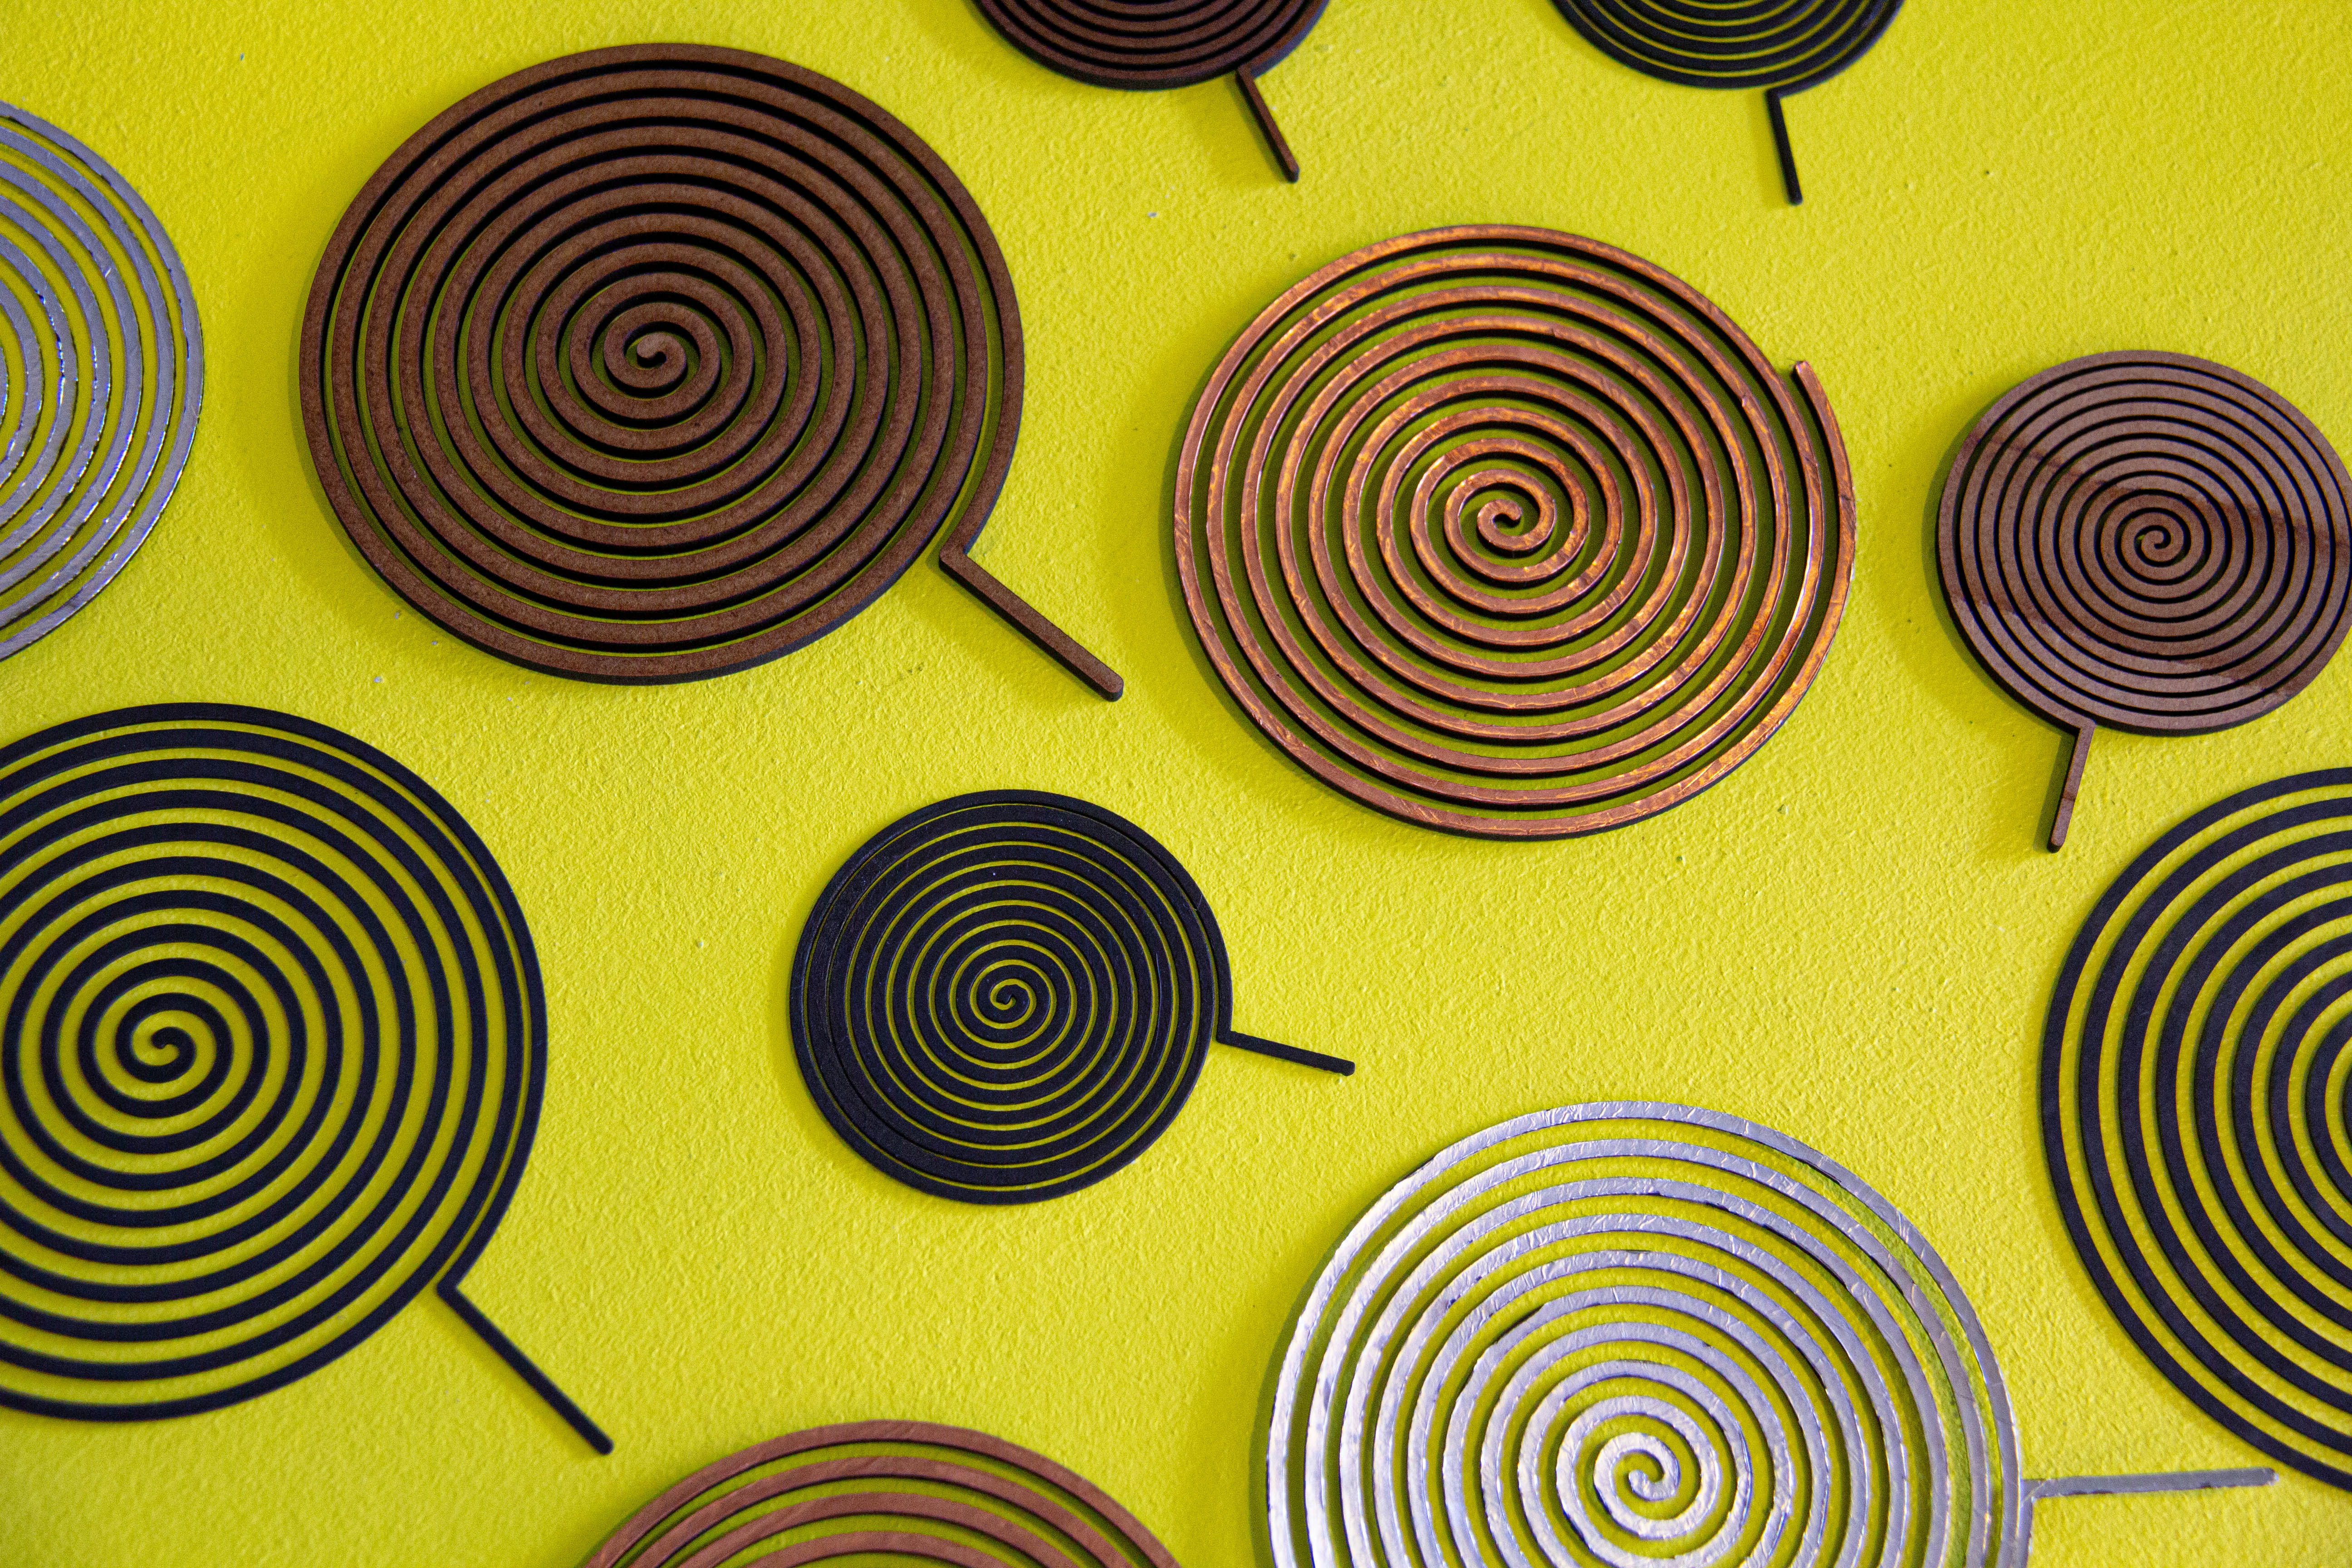 Copper spirals on a yellow surface.